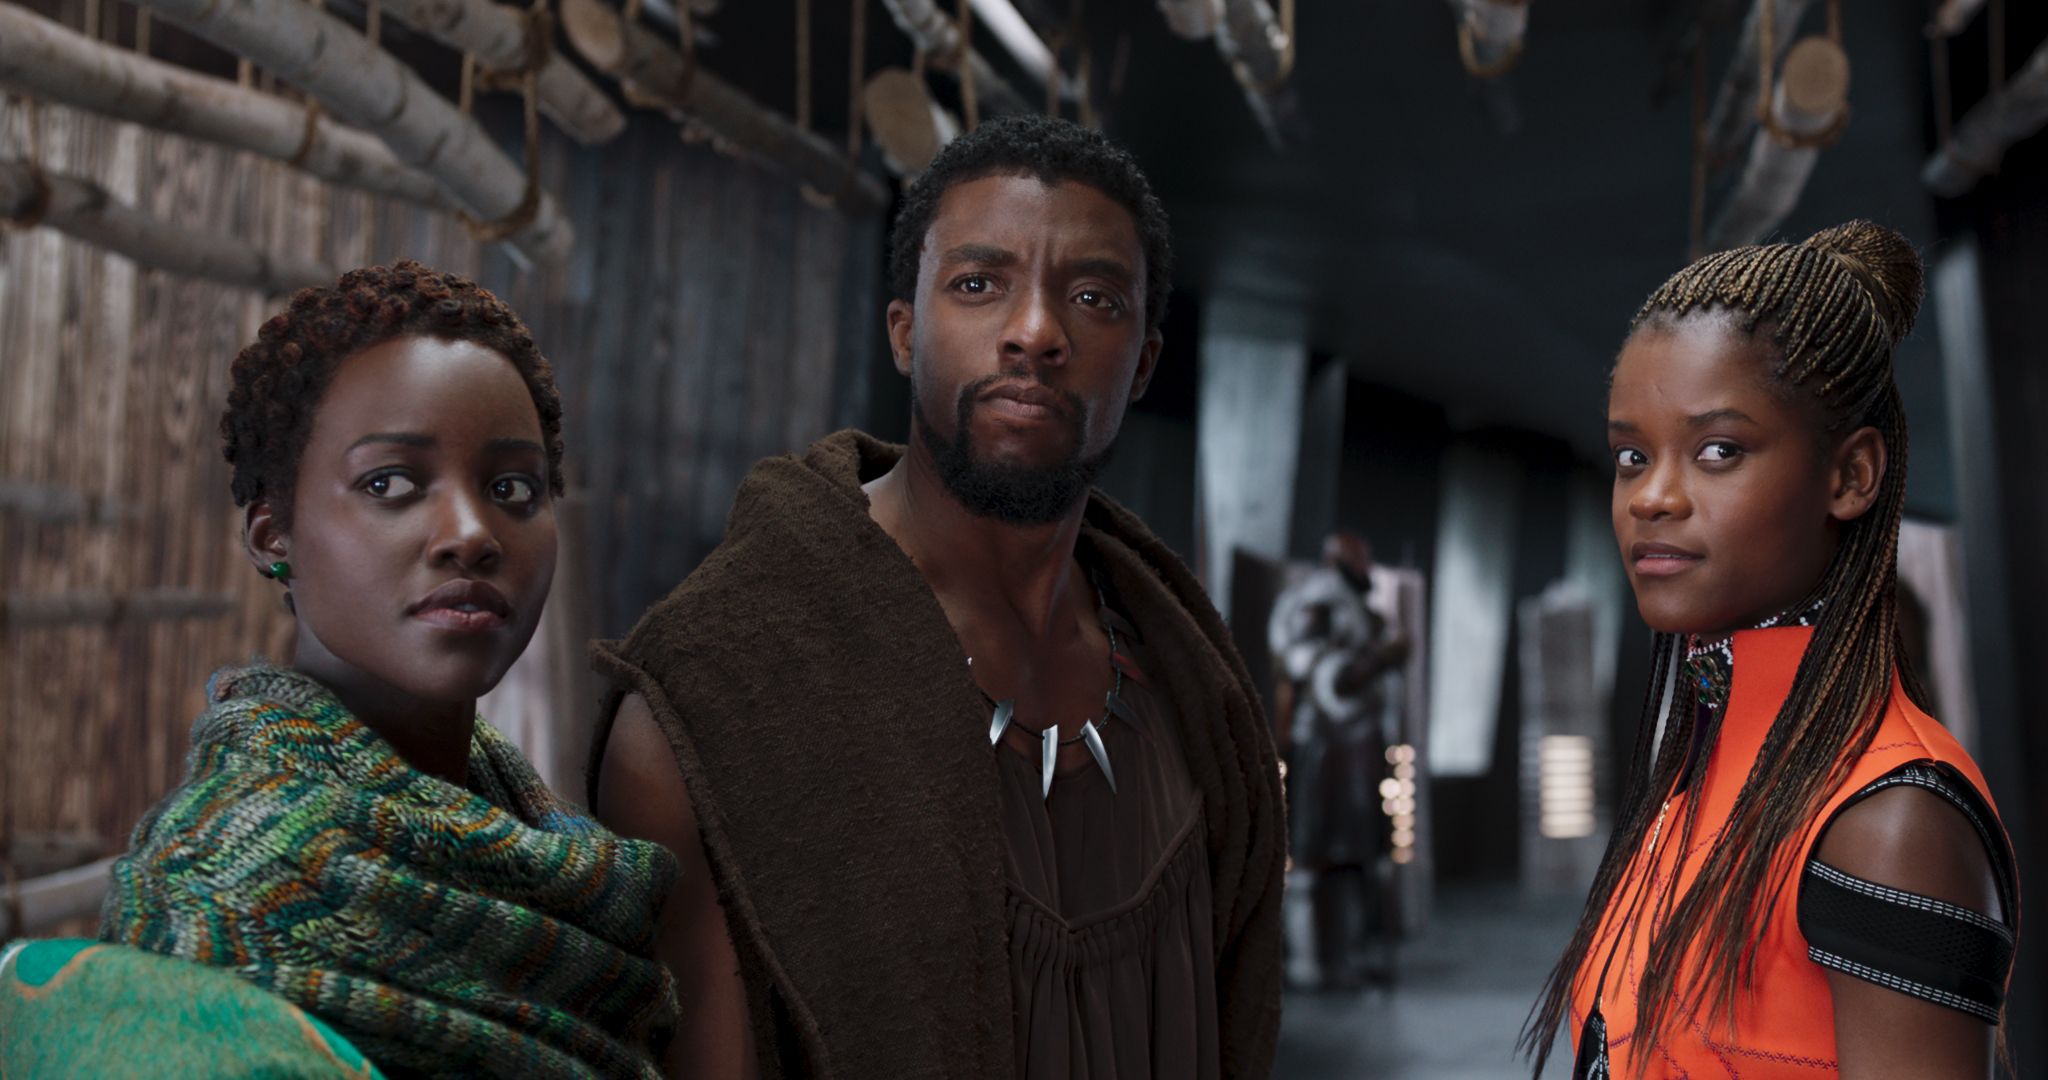 When Will ‘Black Panther 2’ Come Out? Release Date Revealed